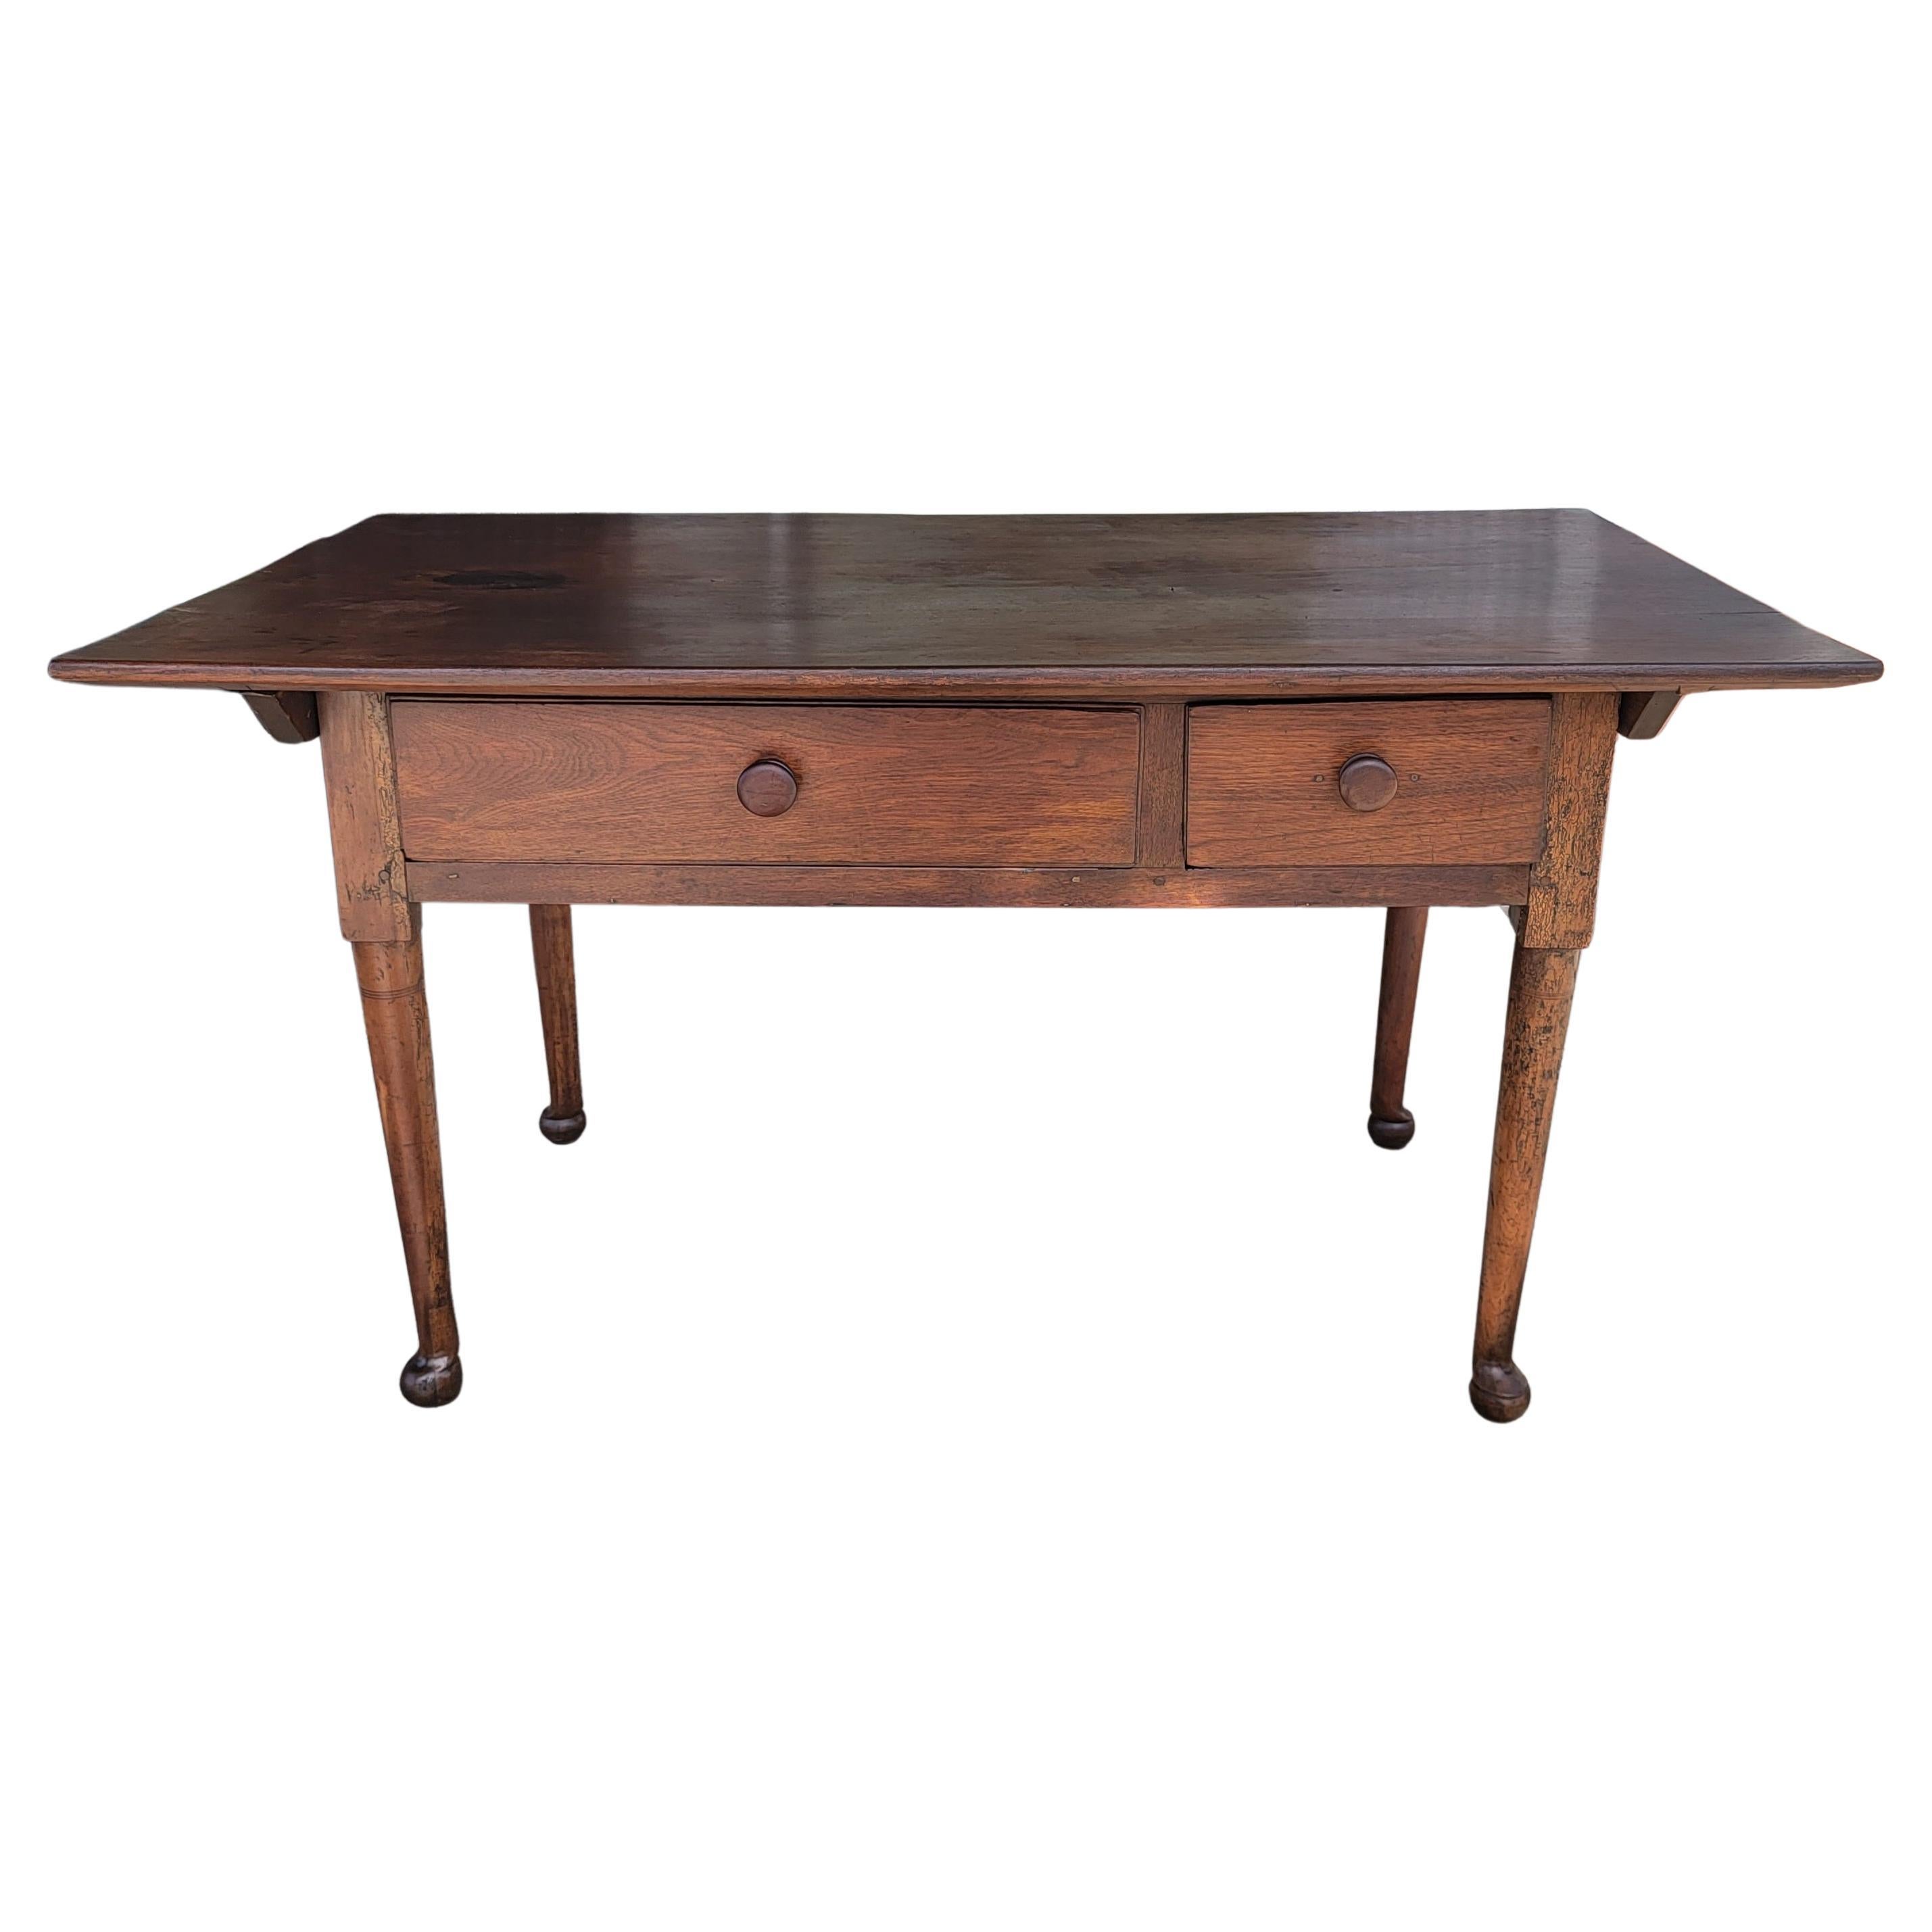 18thc Walnut Tavern Table with Drawers For Sale